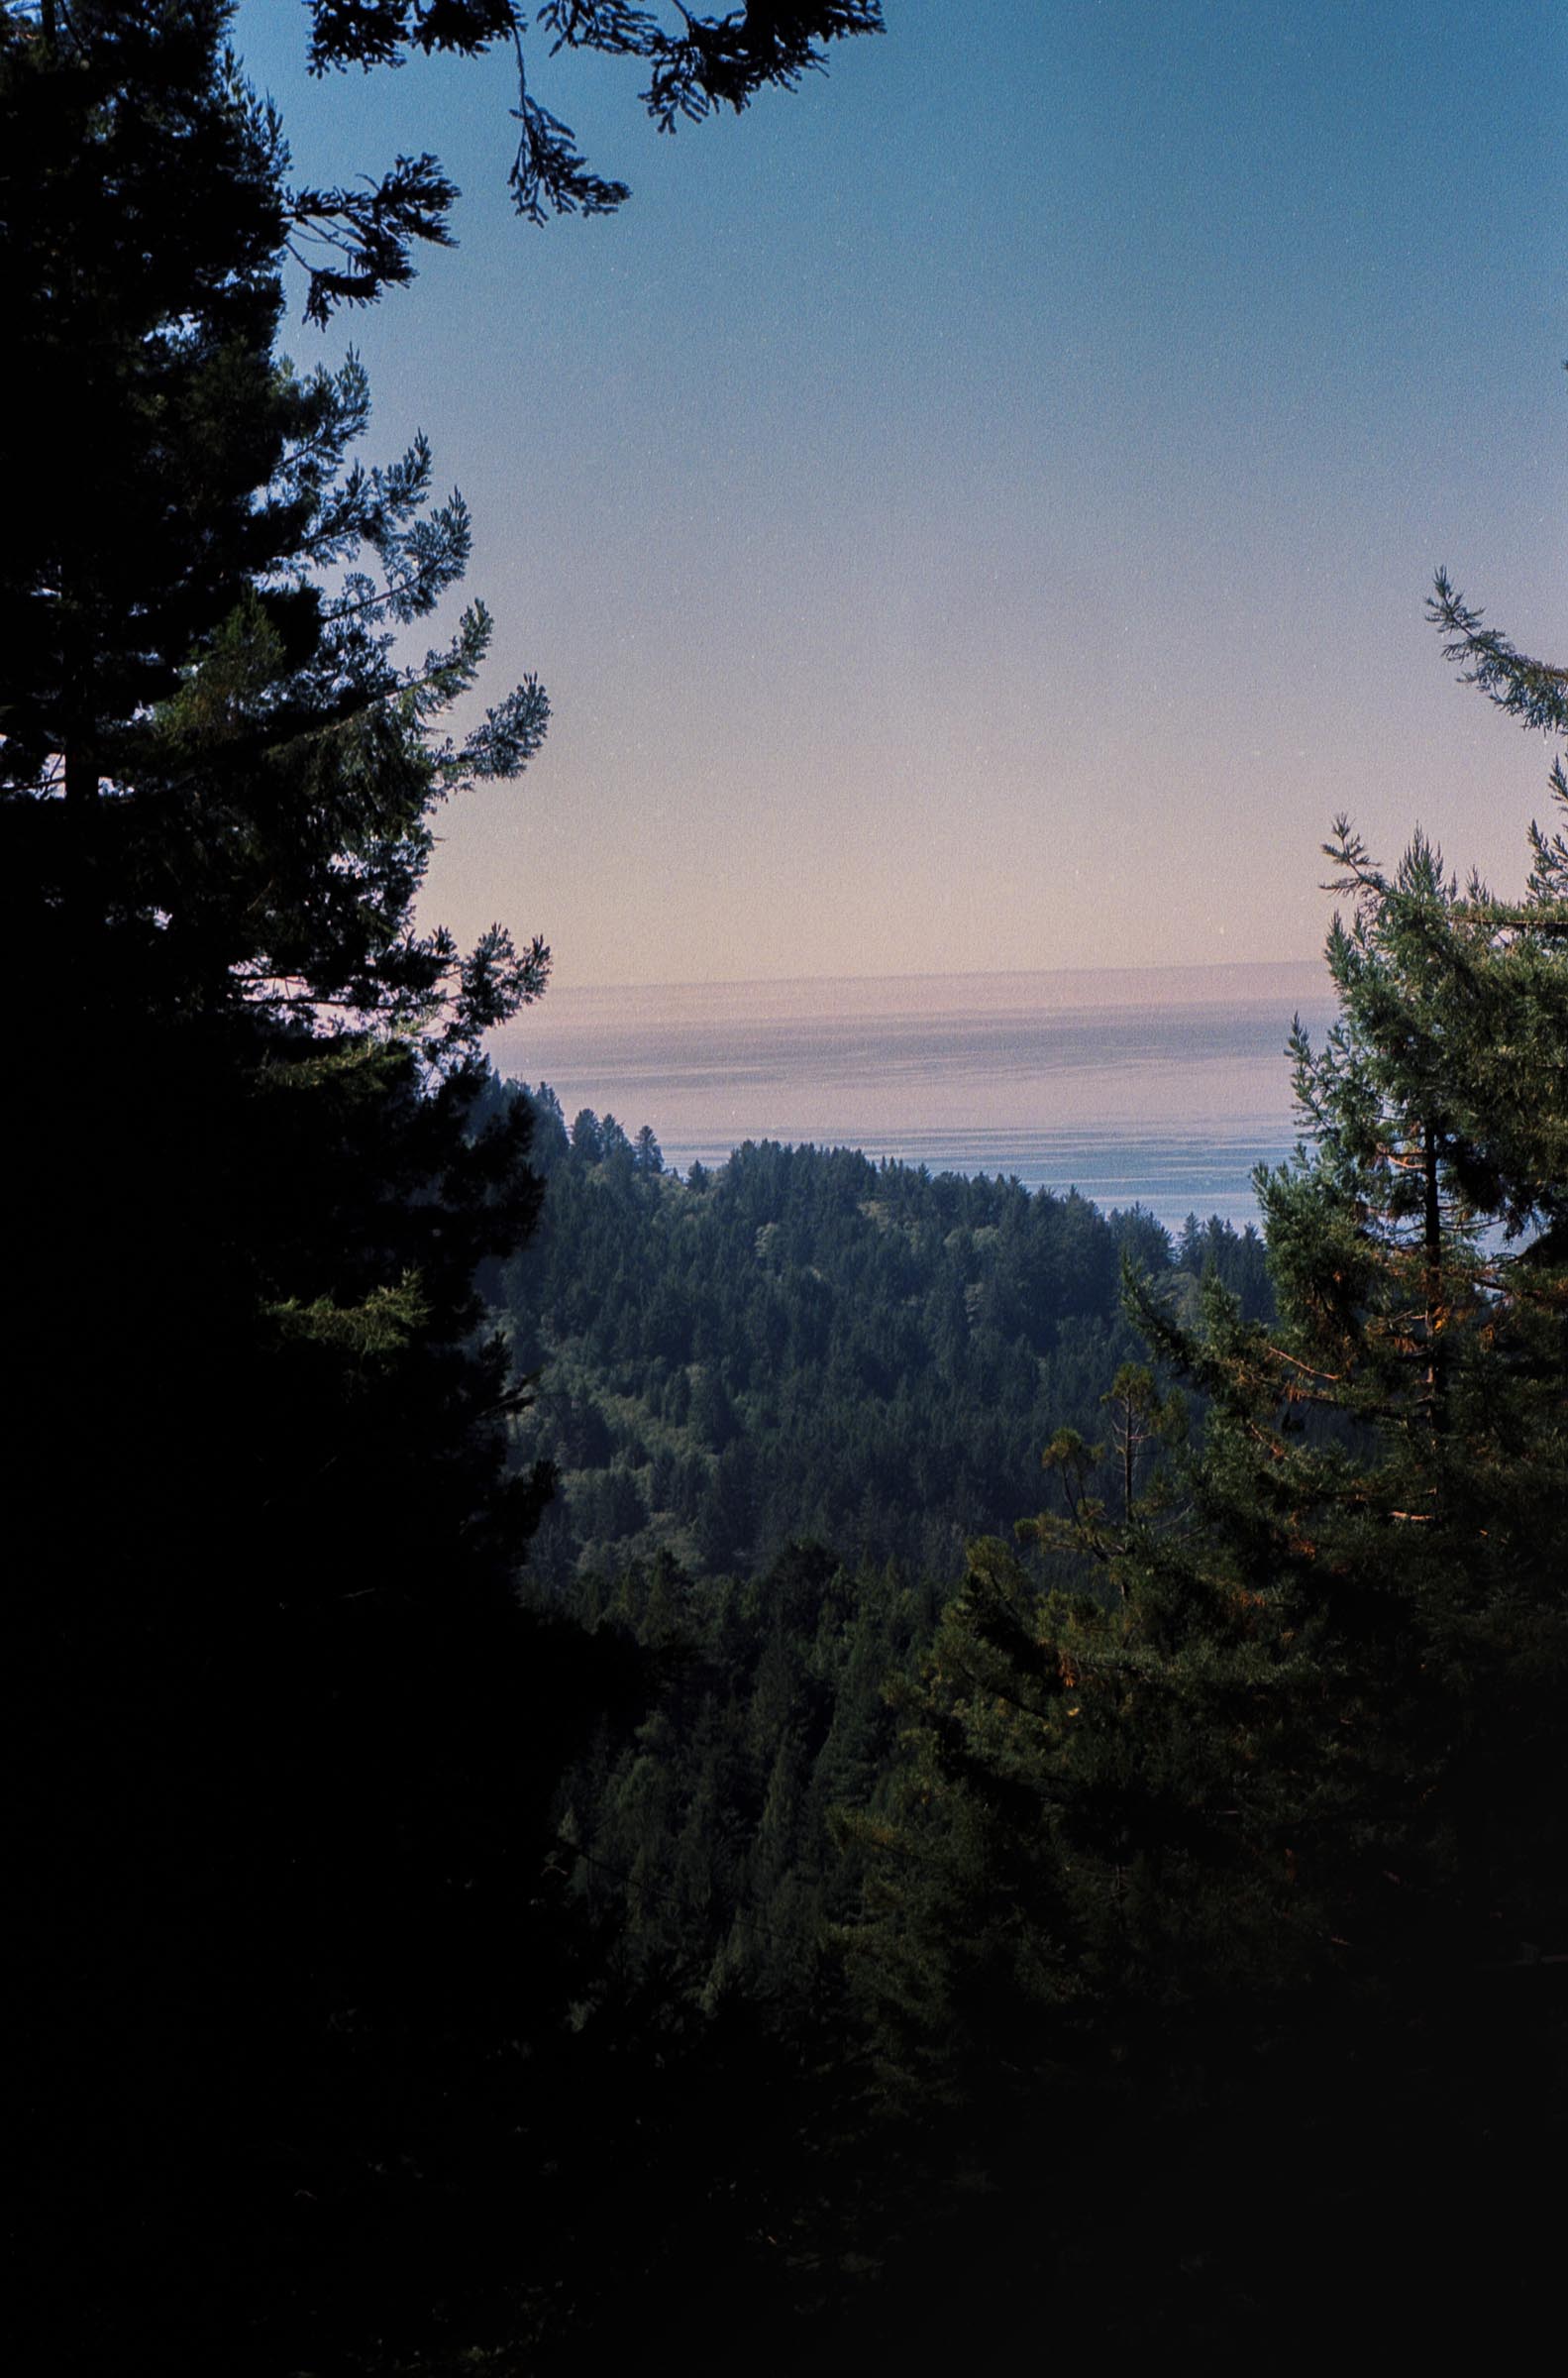 Pacific ocean as seen from the top of "the trees of mystery" attraction in crescent City california